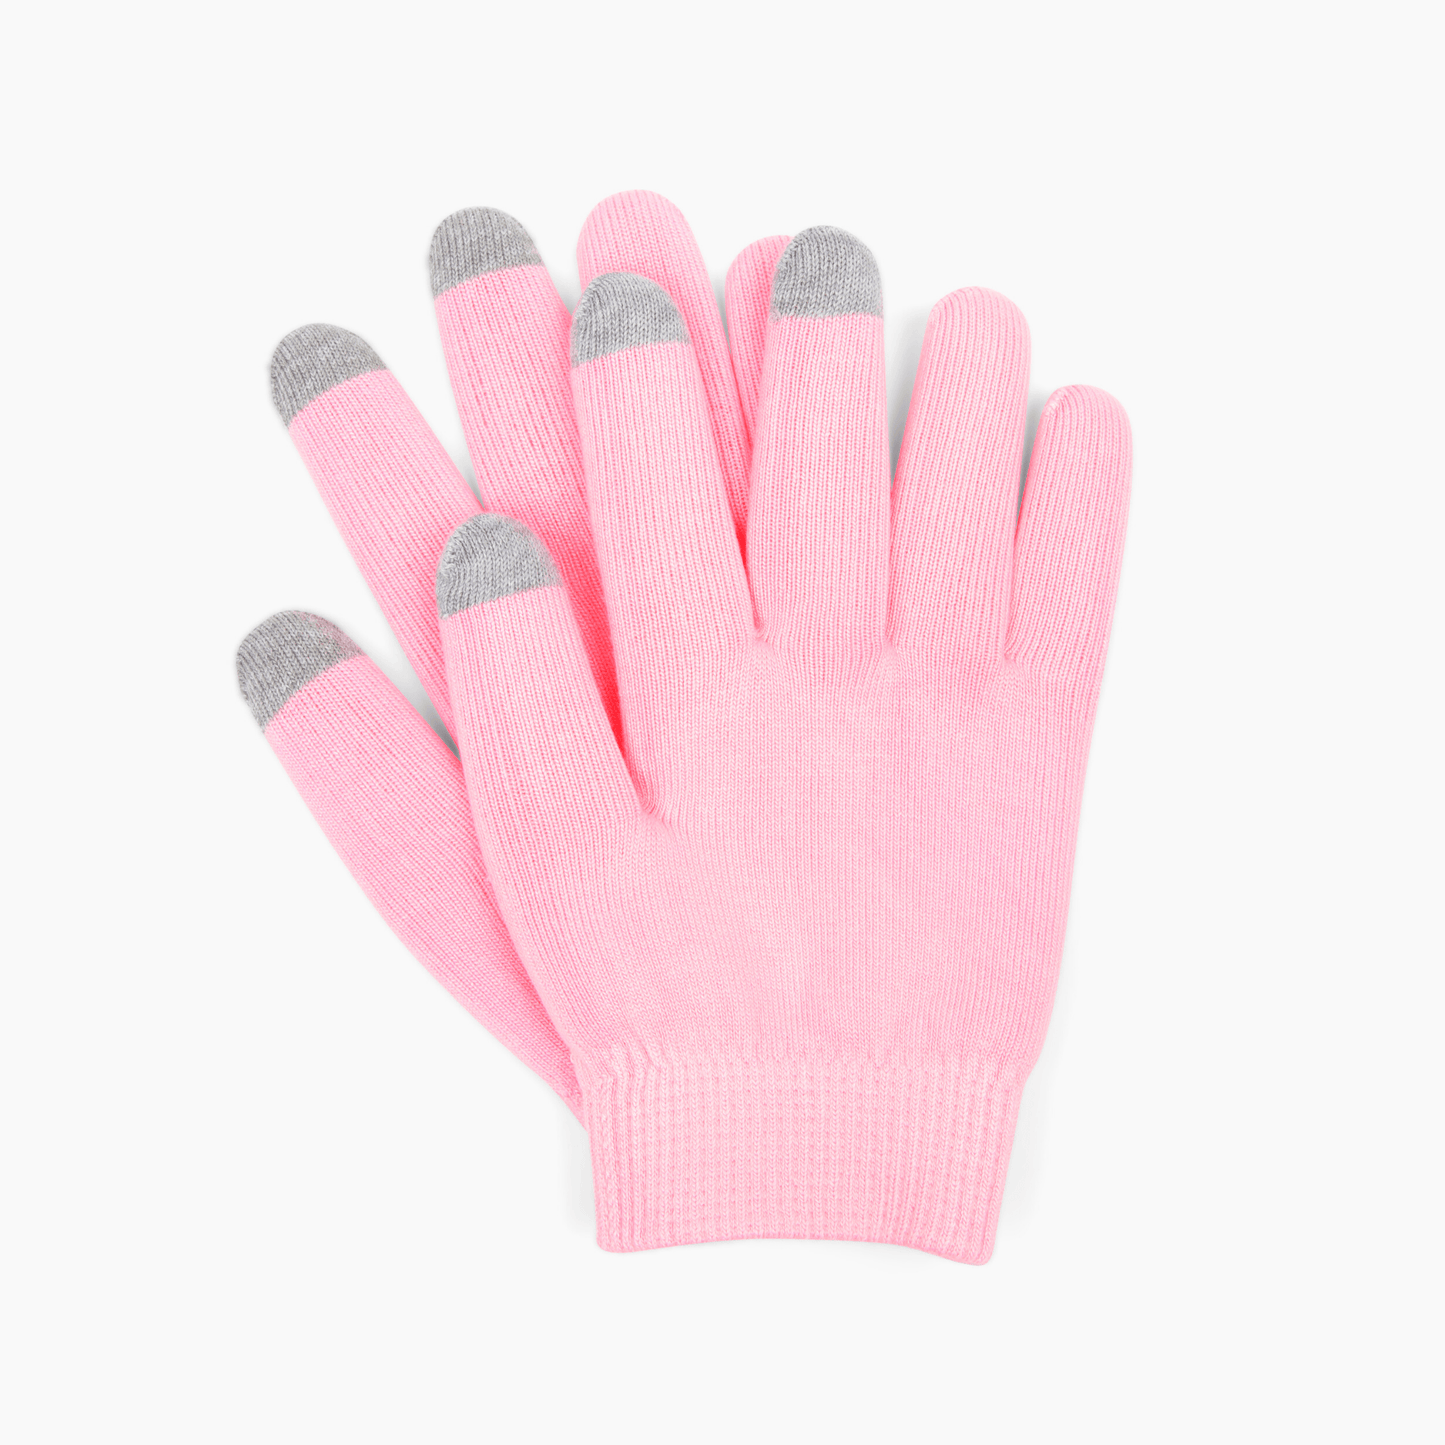 Hydrating Infused Moisturizing Gloves - Dreambox Beauty